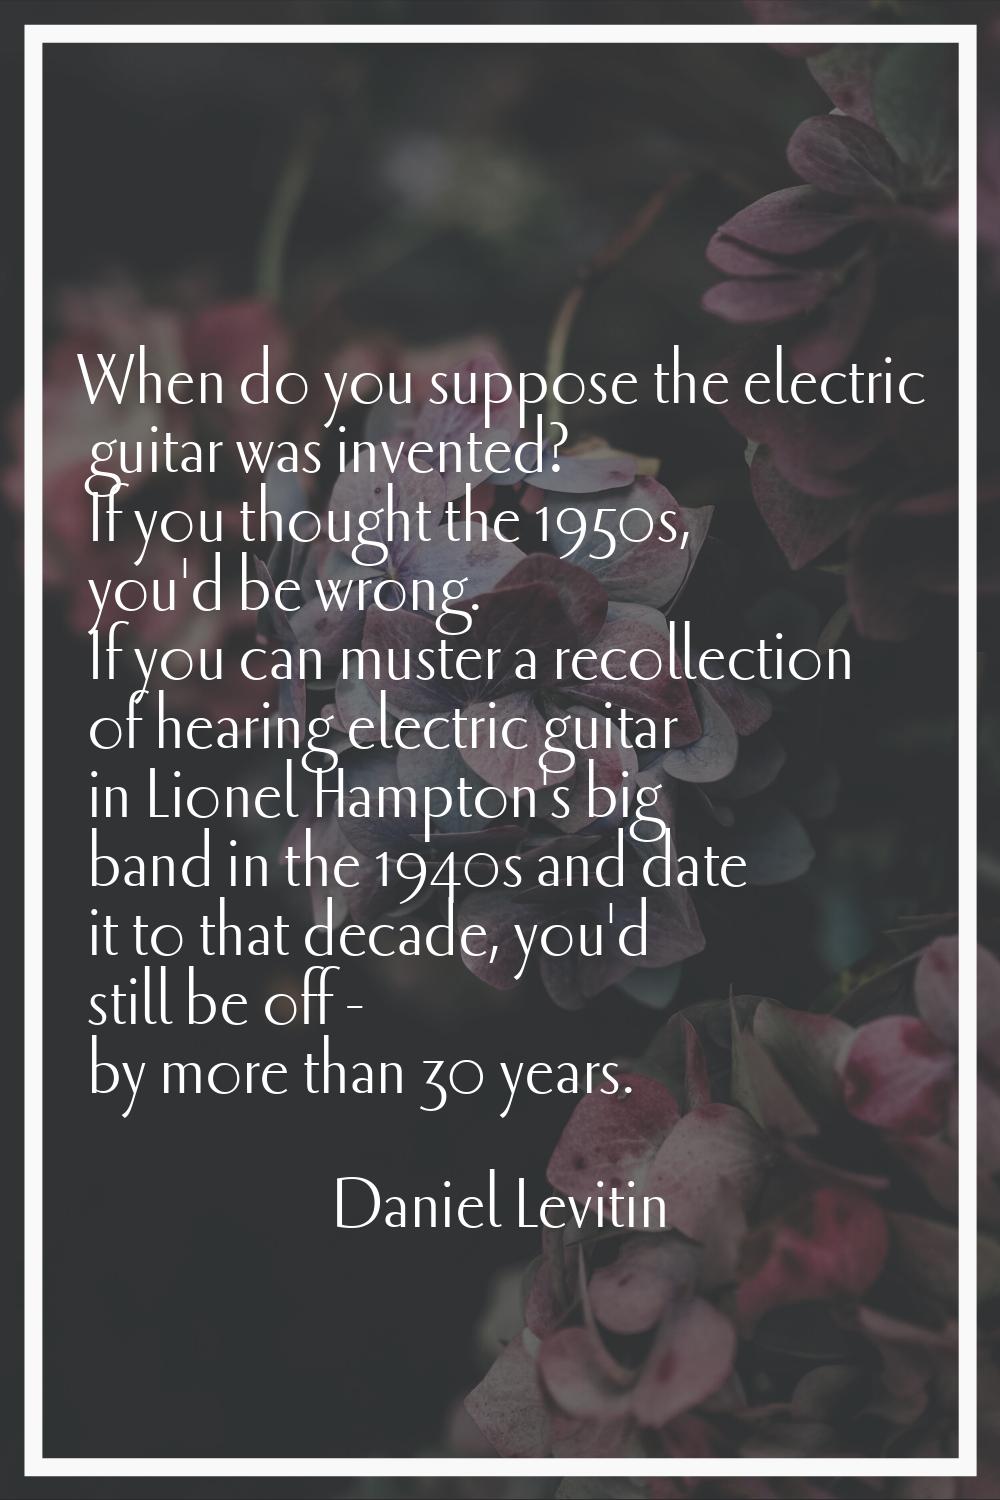 When do you suppose the electric guitar was invented? If you thought the 1950s, you'd be wrong. If 